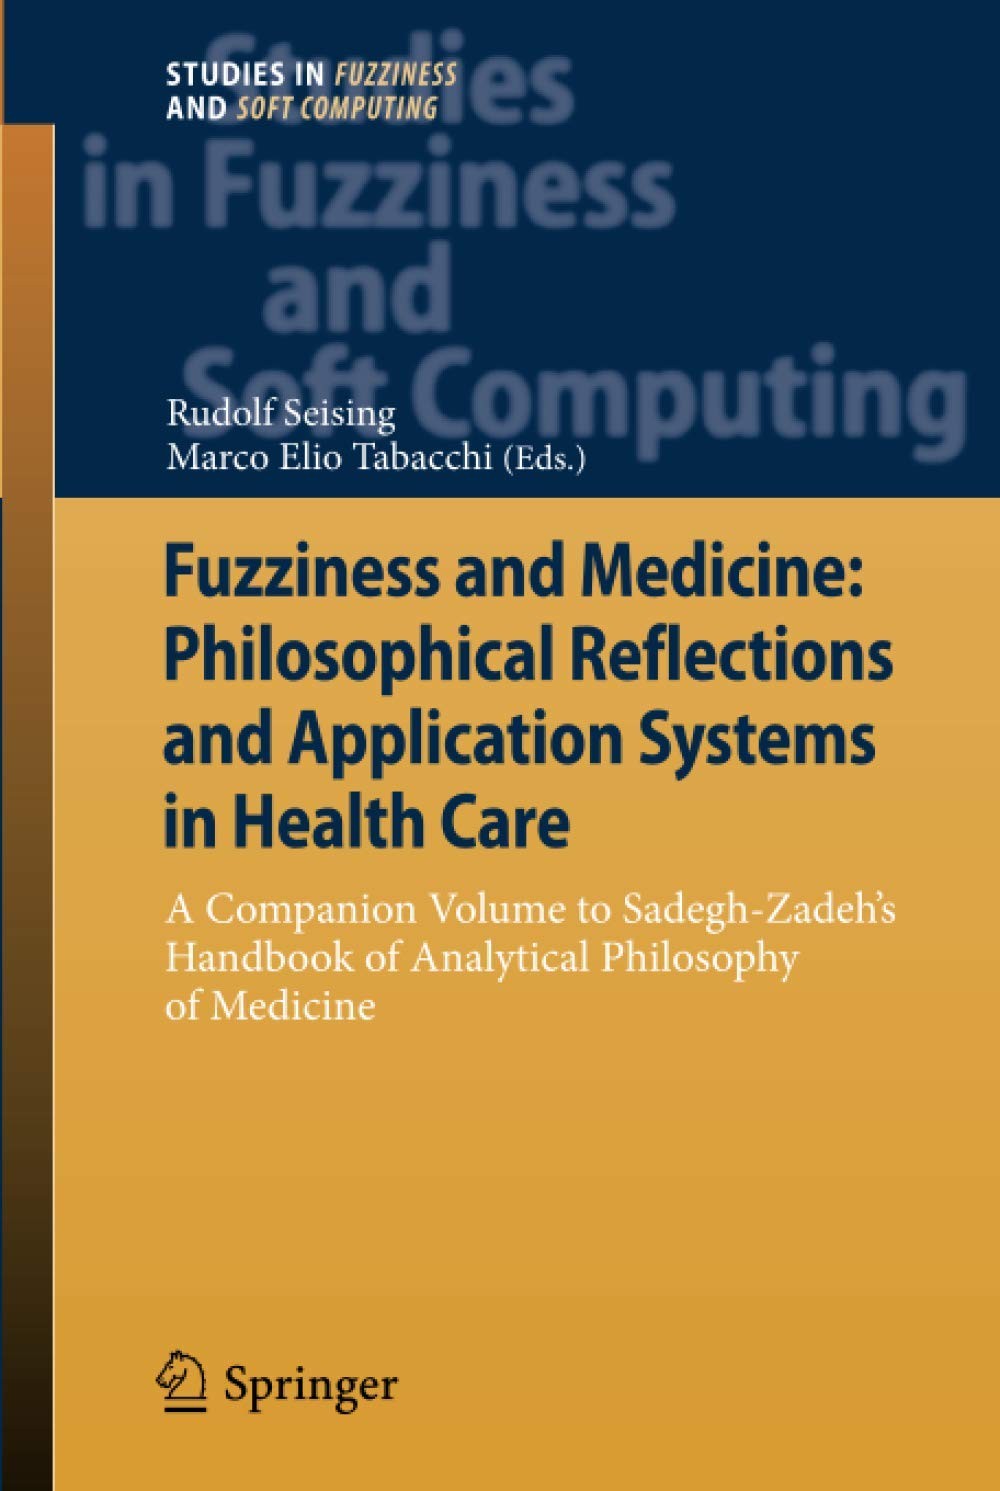 Fuzziness and Medicine: Philosophical Reflections and Application Systems in Health Care: A Companion Volume to Sadegh-Zadeh’s Handbook of Analytical Philosophy of Medicine